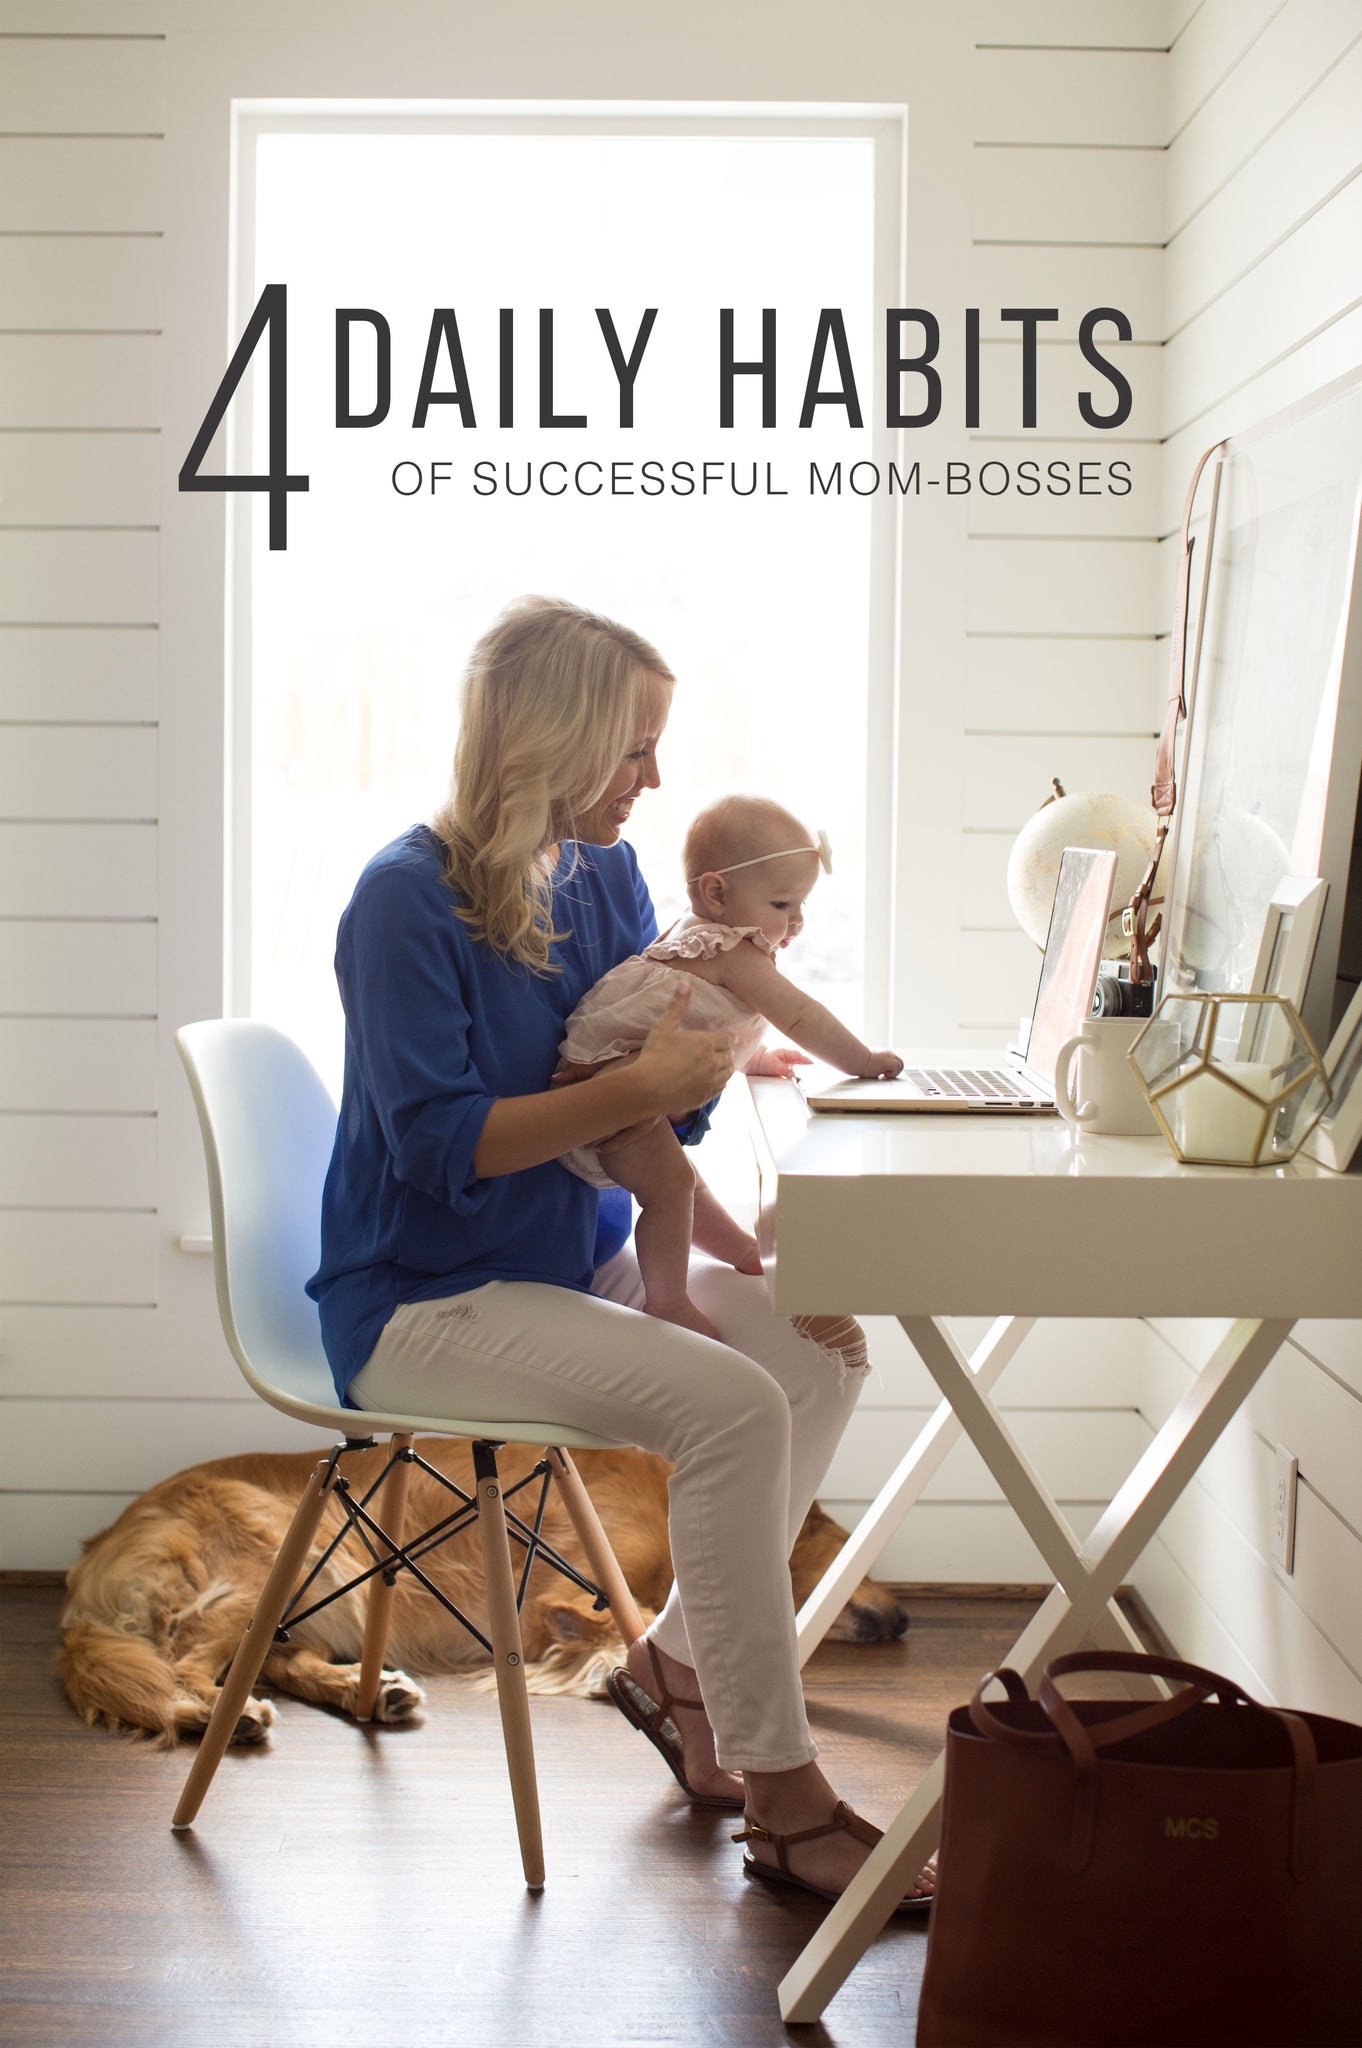 As an encouragement to all our fellow working moms out there, we have outlined 4 daily habits to help you lead a more successful work/life balance and really have it all!